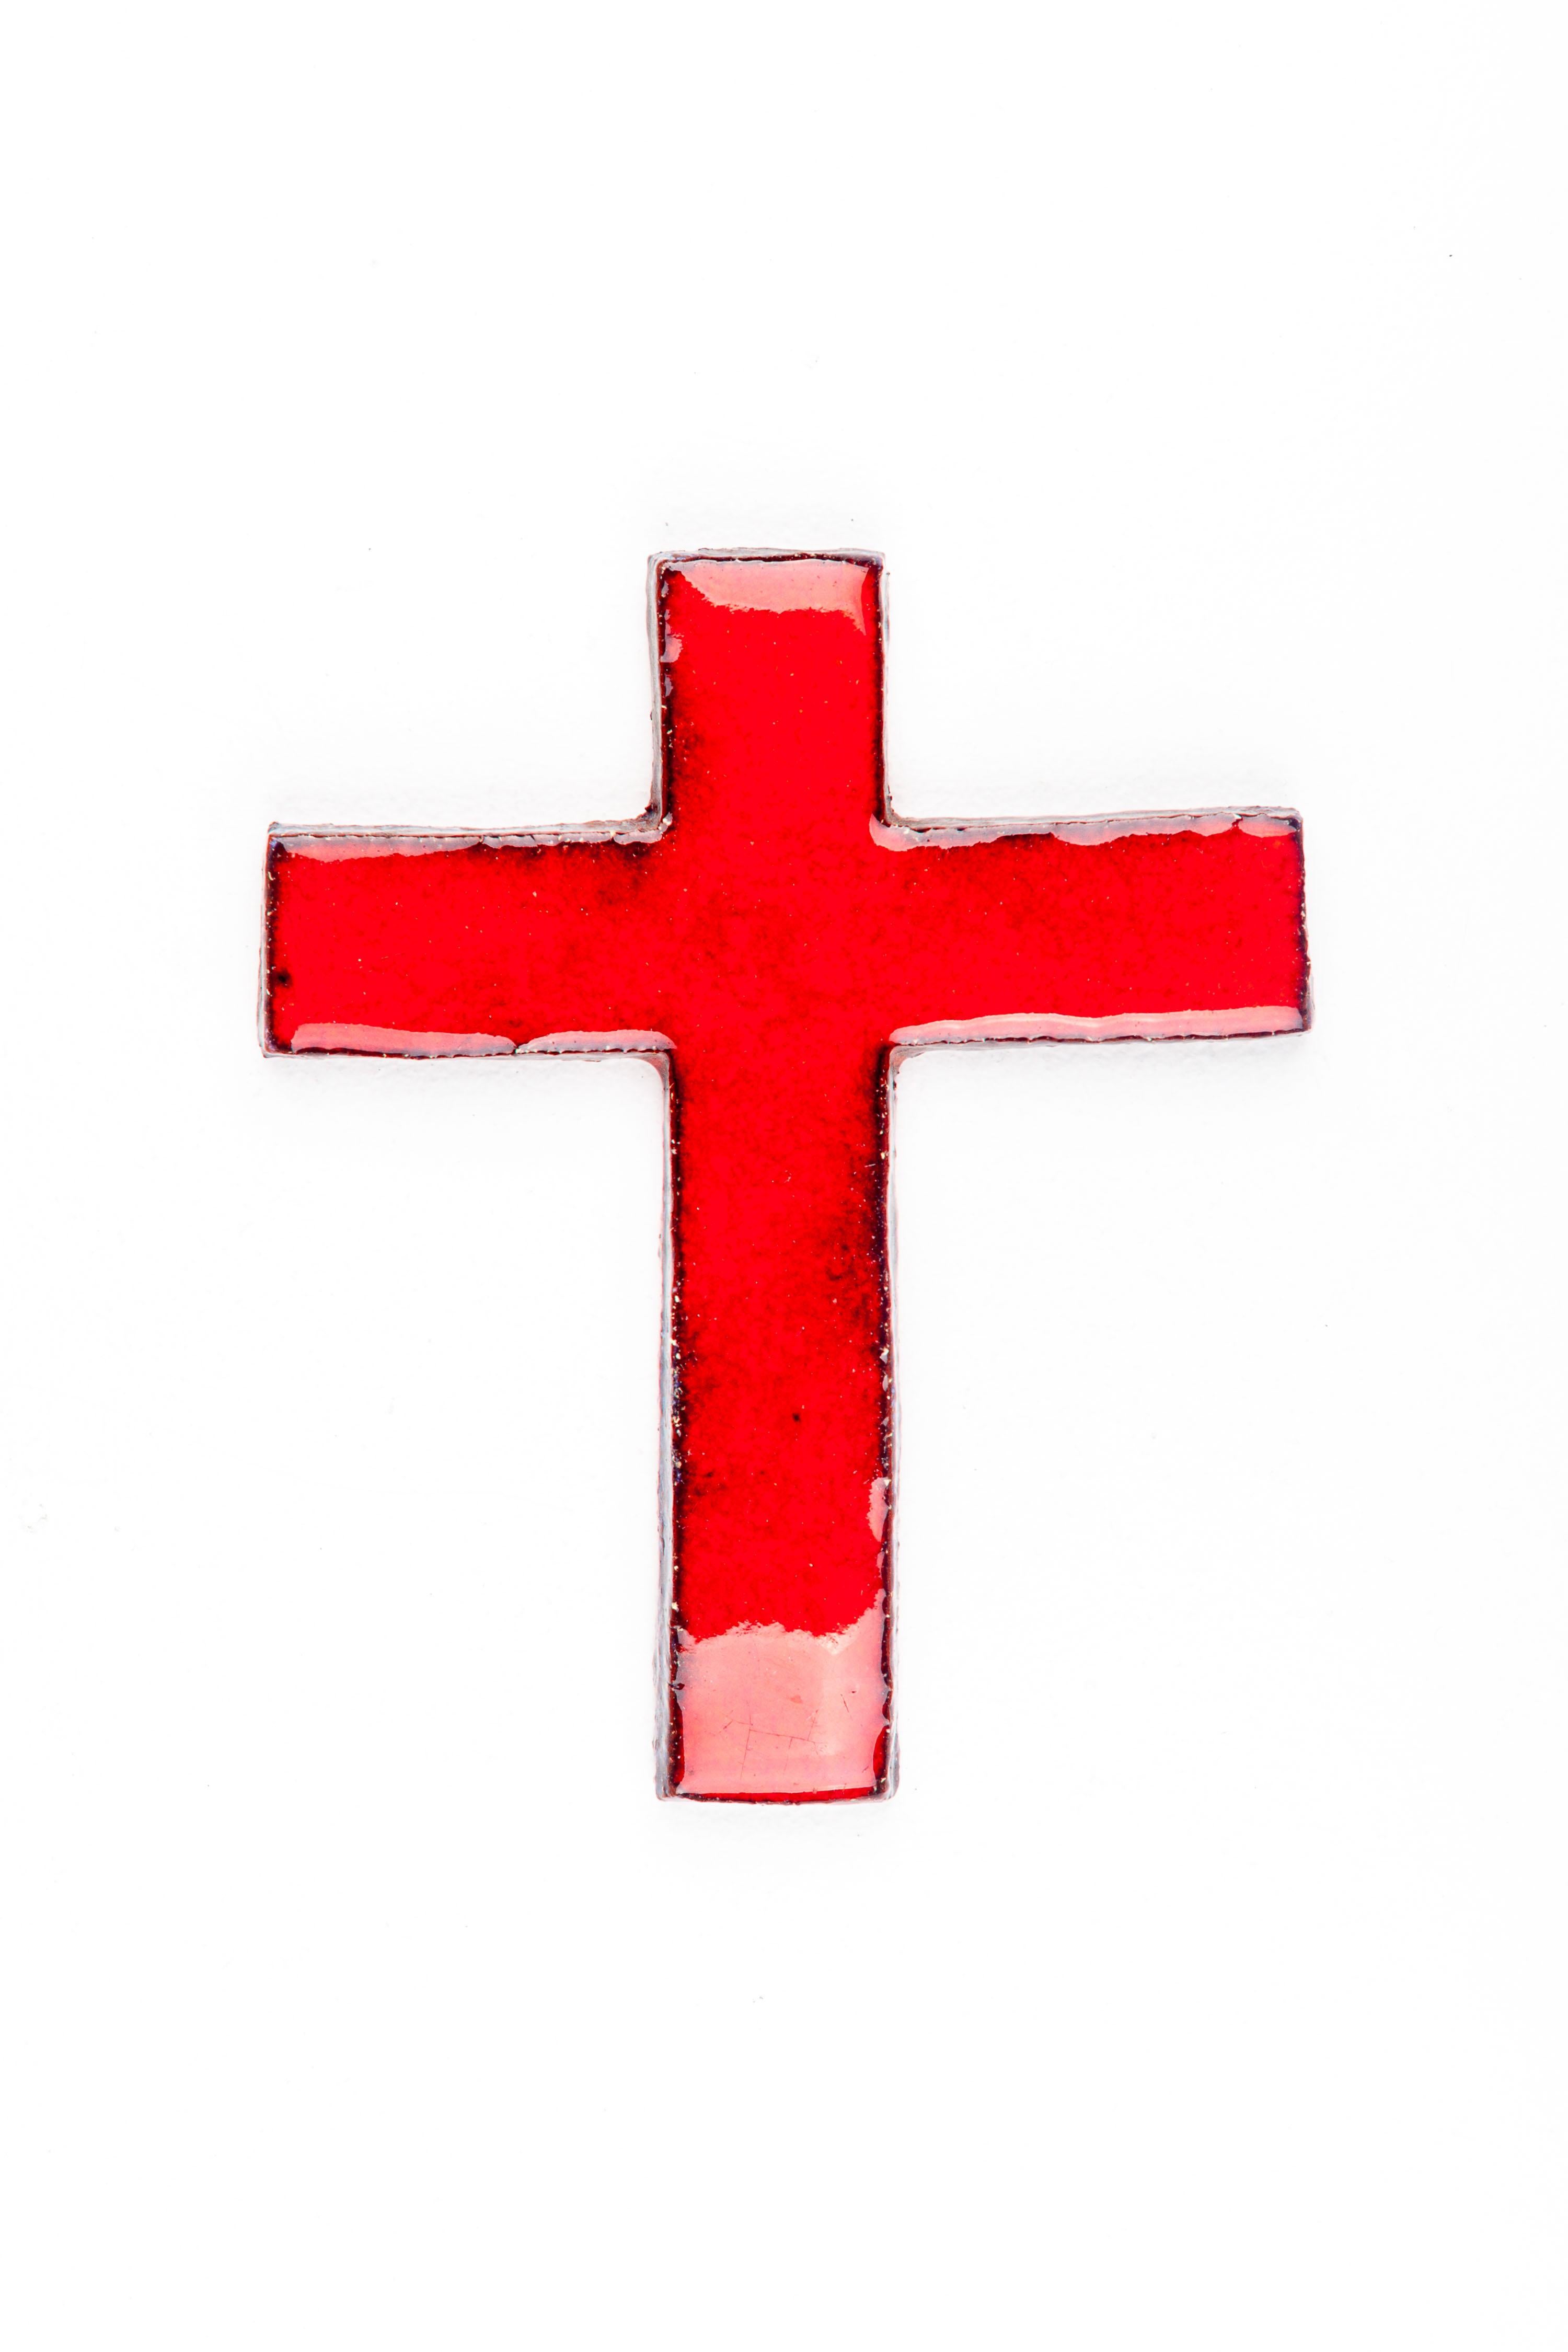 This handcrafted ceramic cross is a distinctive artifact of mid-century modern design, created by European studio pottery artists renowned for their innovative approaches to traditional forms. The cross, with its bold red glaze, stands out as a